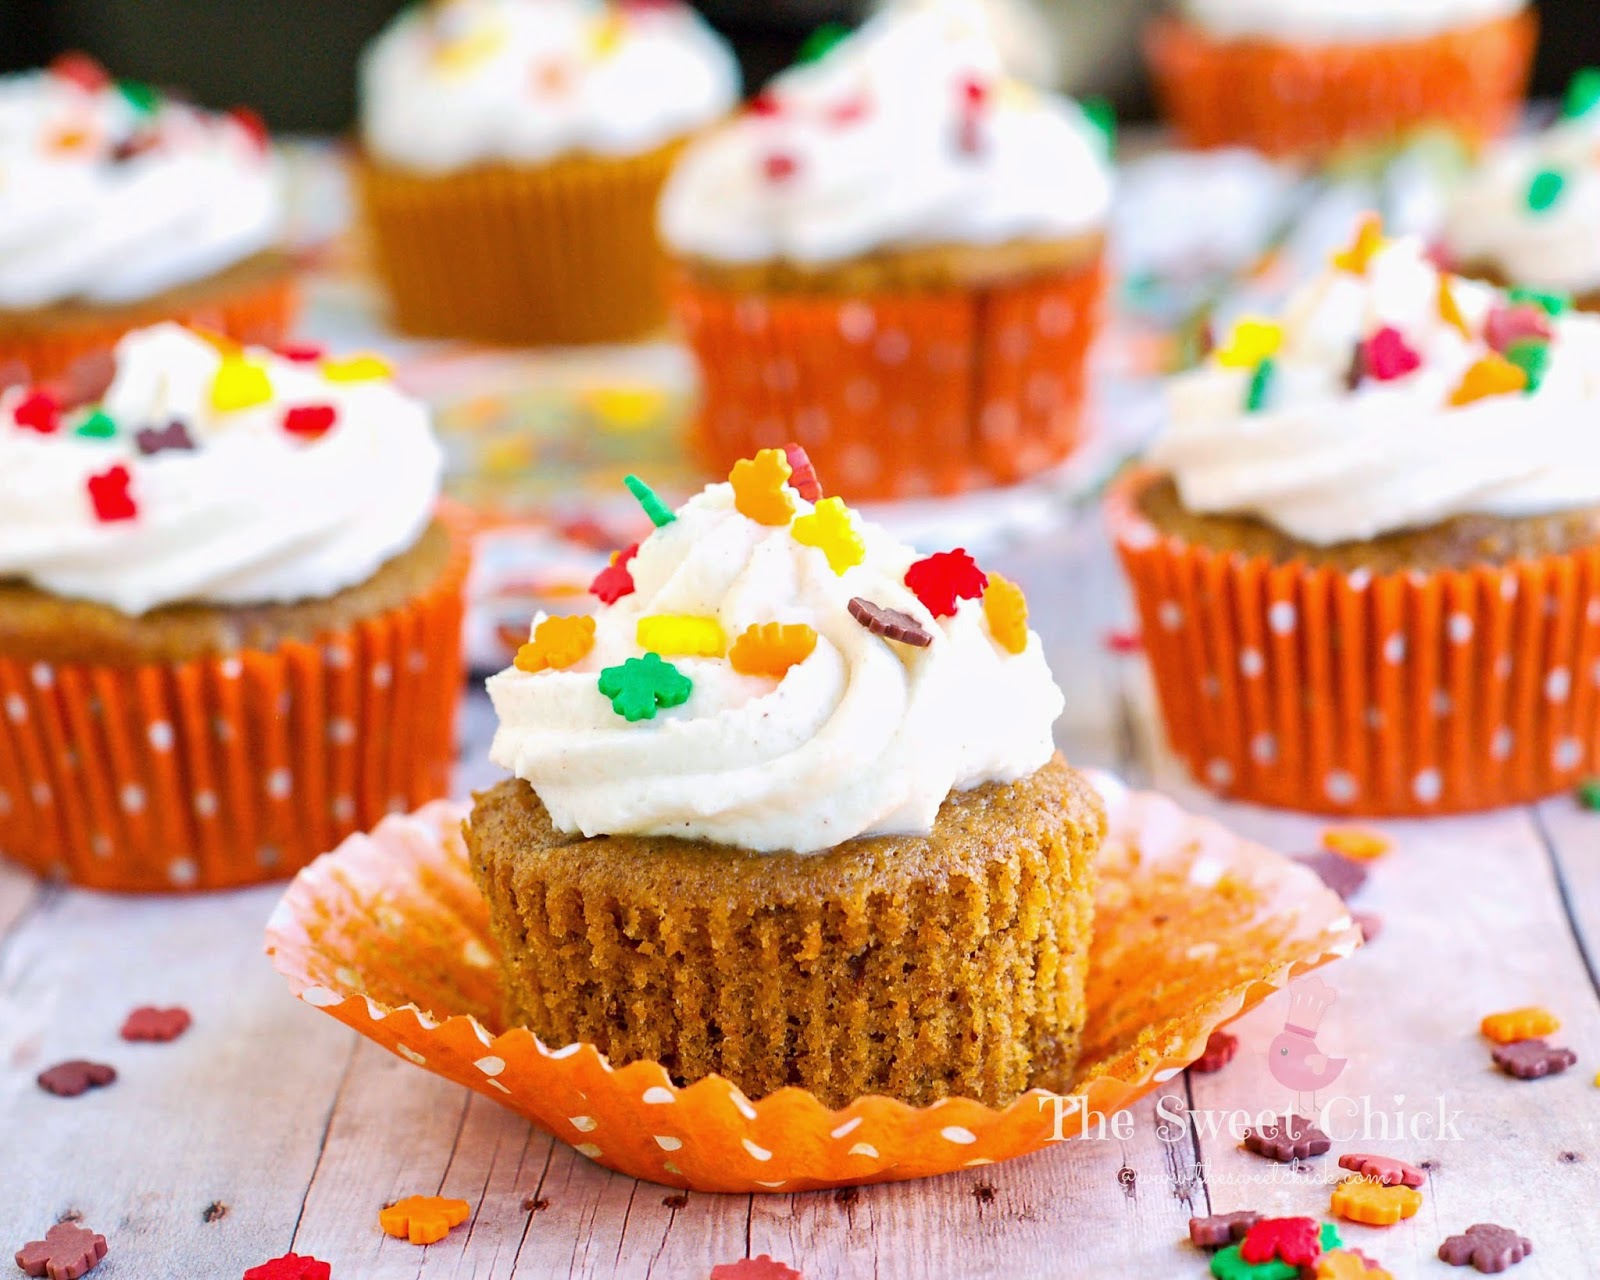 Spiced Butternut Squash Cupcakes by The Sweet Chick